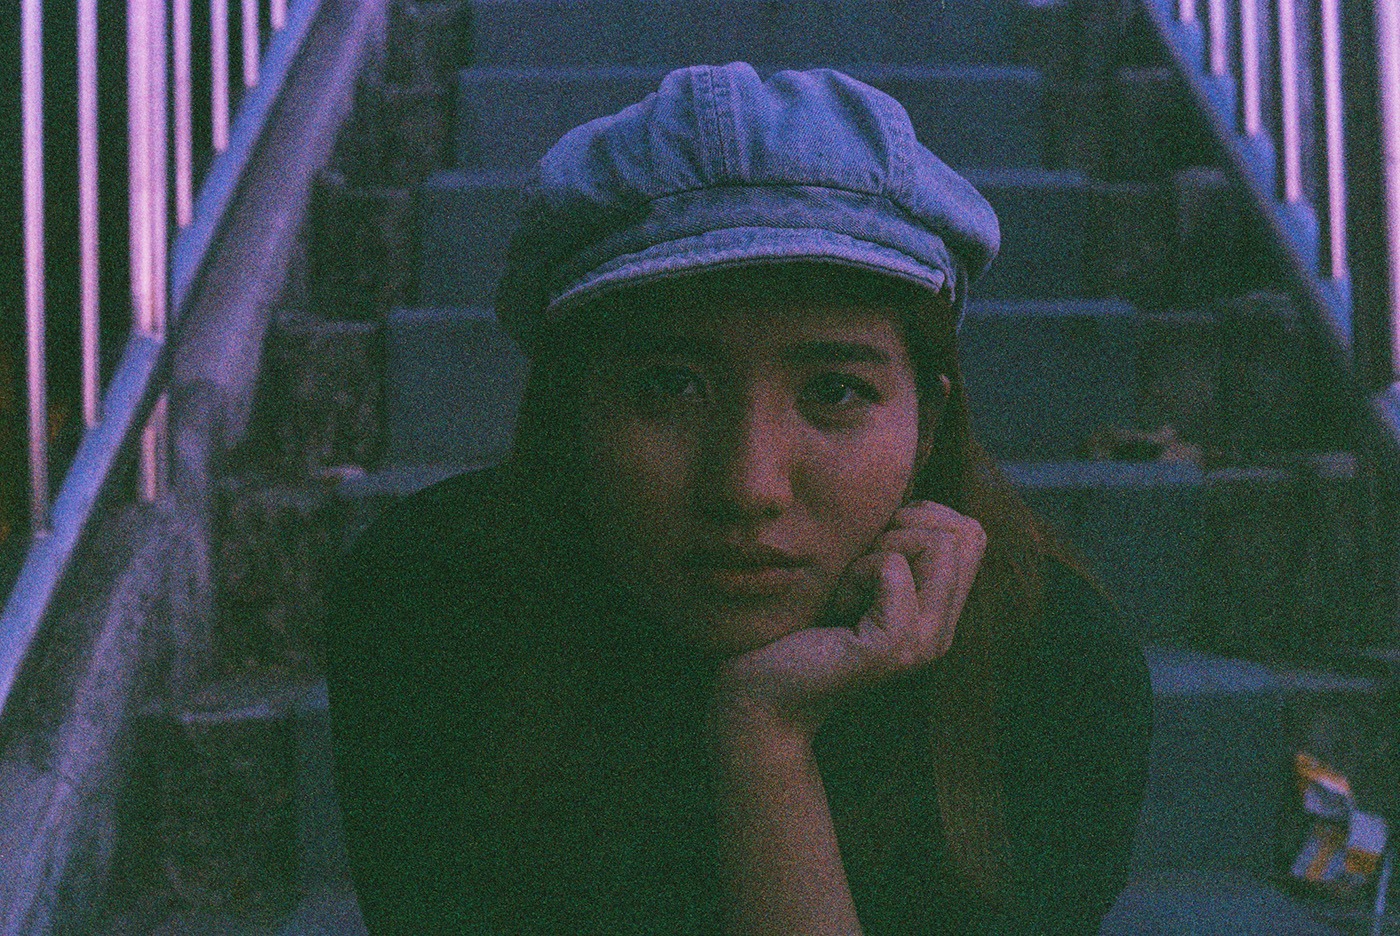 Young Asian woman in an urban setting, sitting on concrete steps staring into the camera. Heavy grain and color shifts from being shot on expired film.